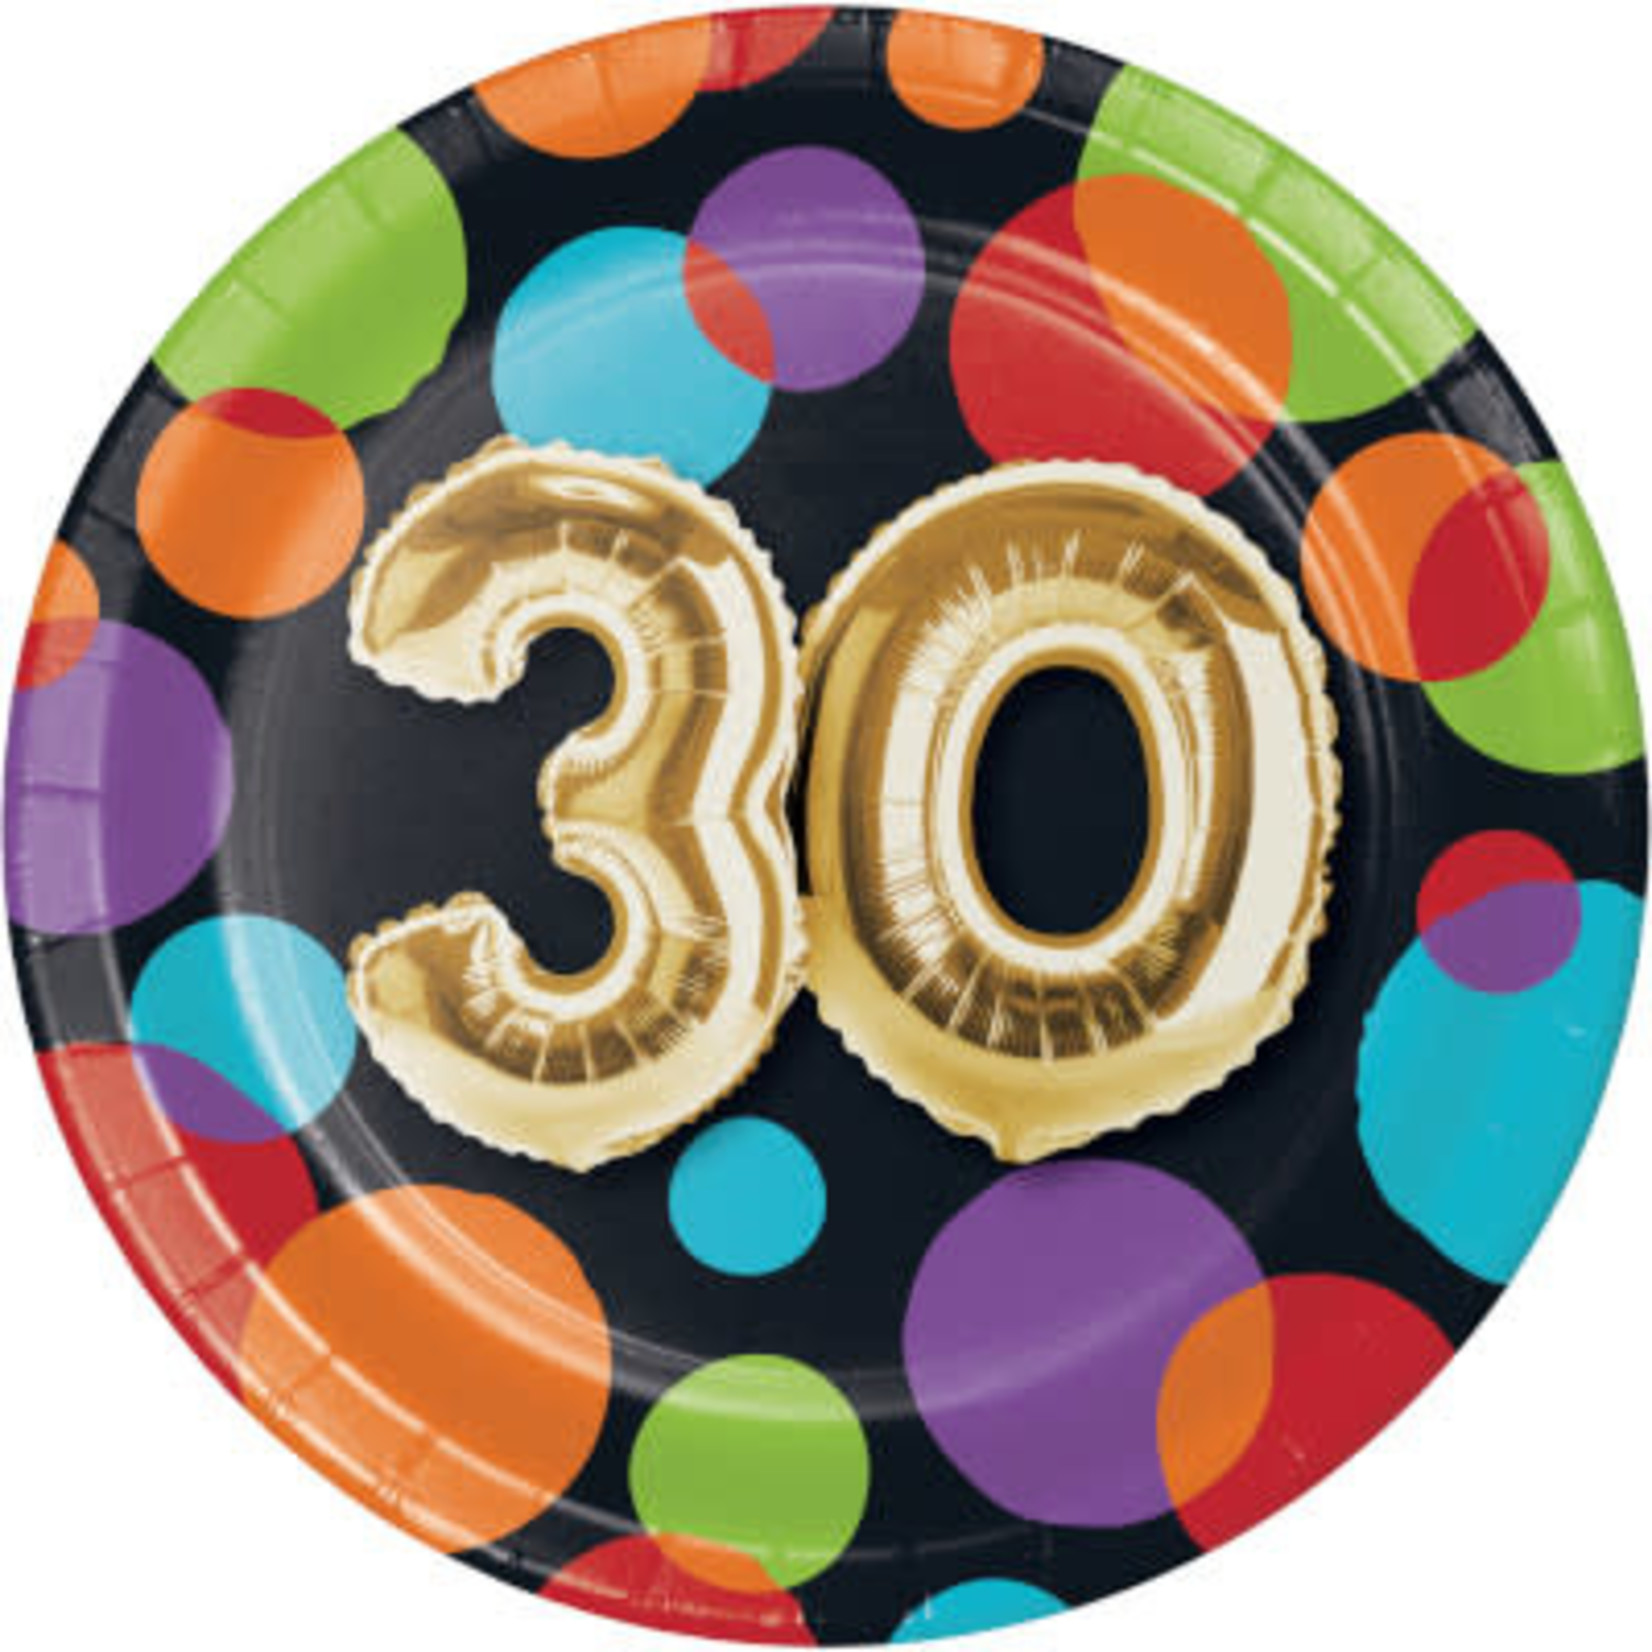 Party Creations 30 balloon birthday 7in. Plate - 8ct.